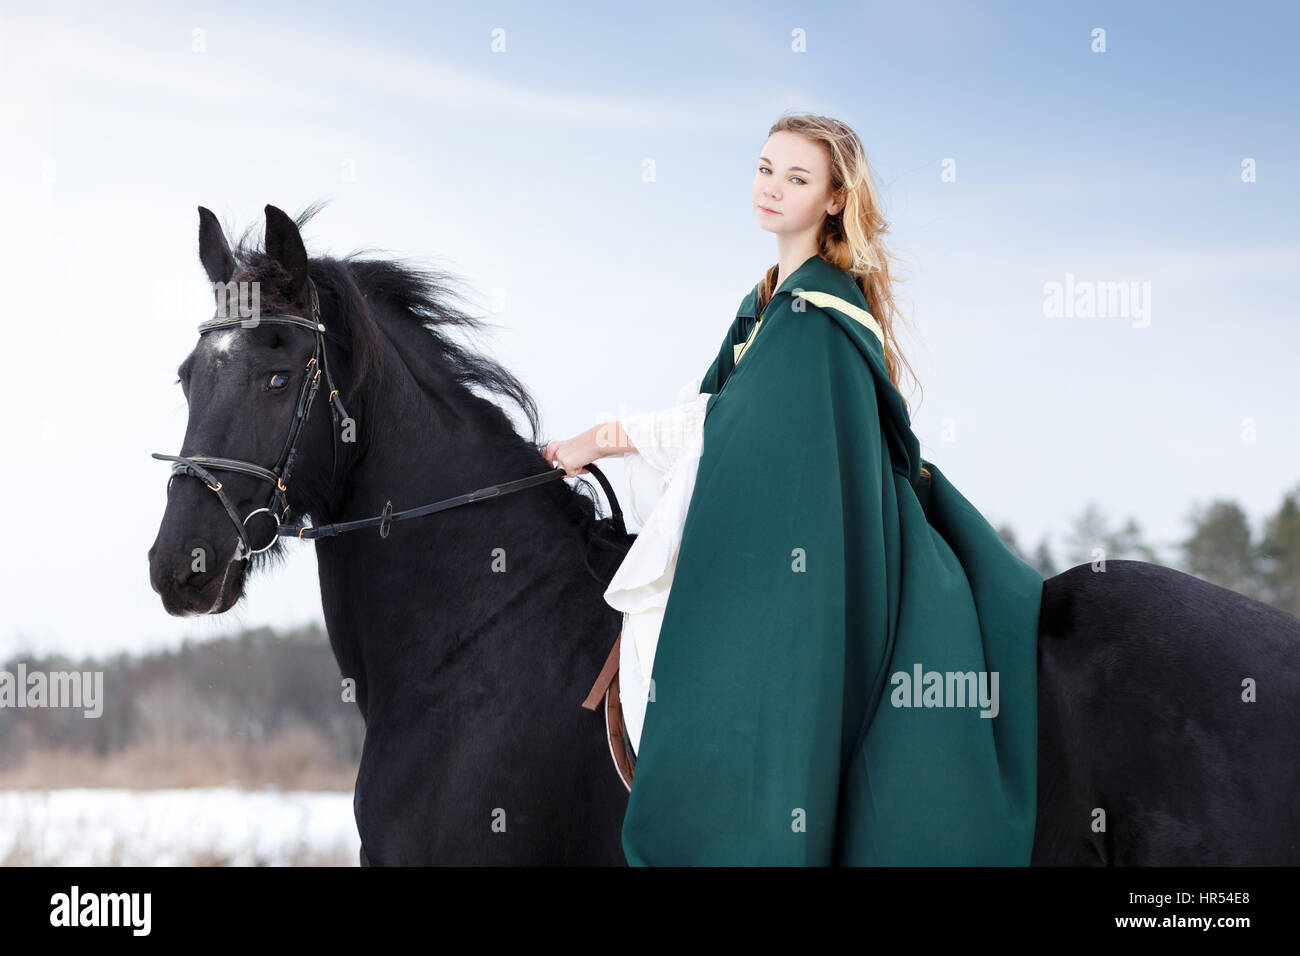 Young girl in white dress and green cape riding black thoroughbred horse in winter. Historical image Stock Photo